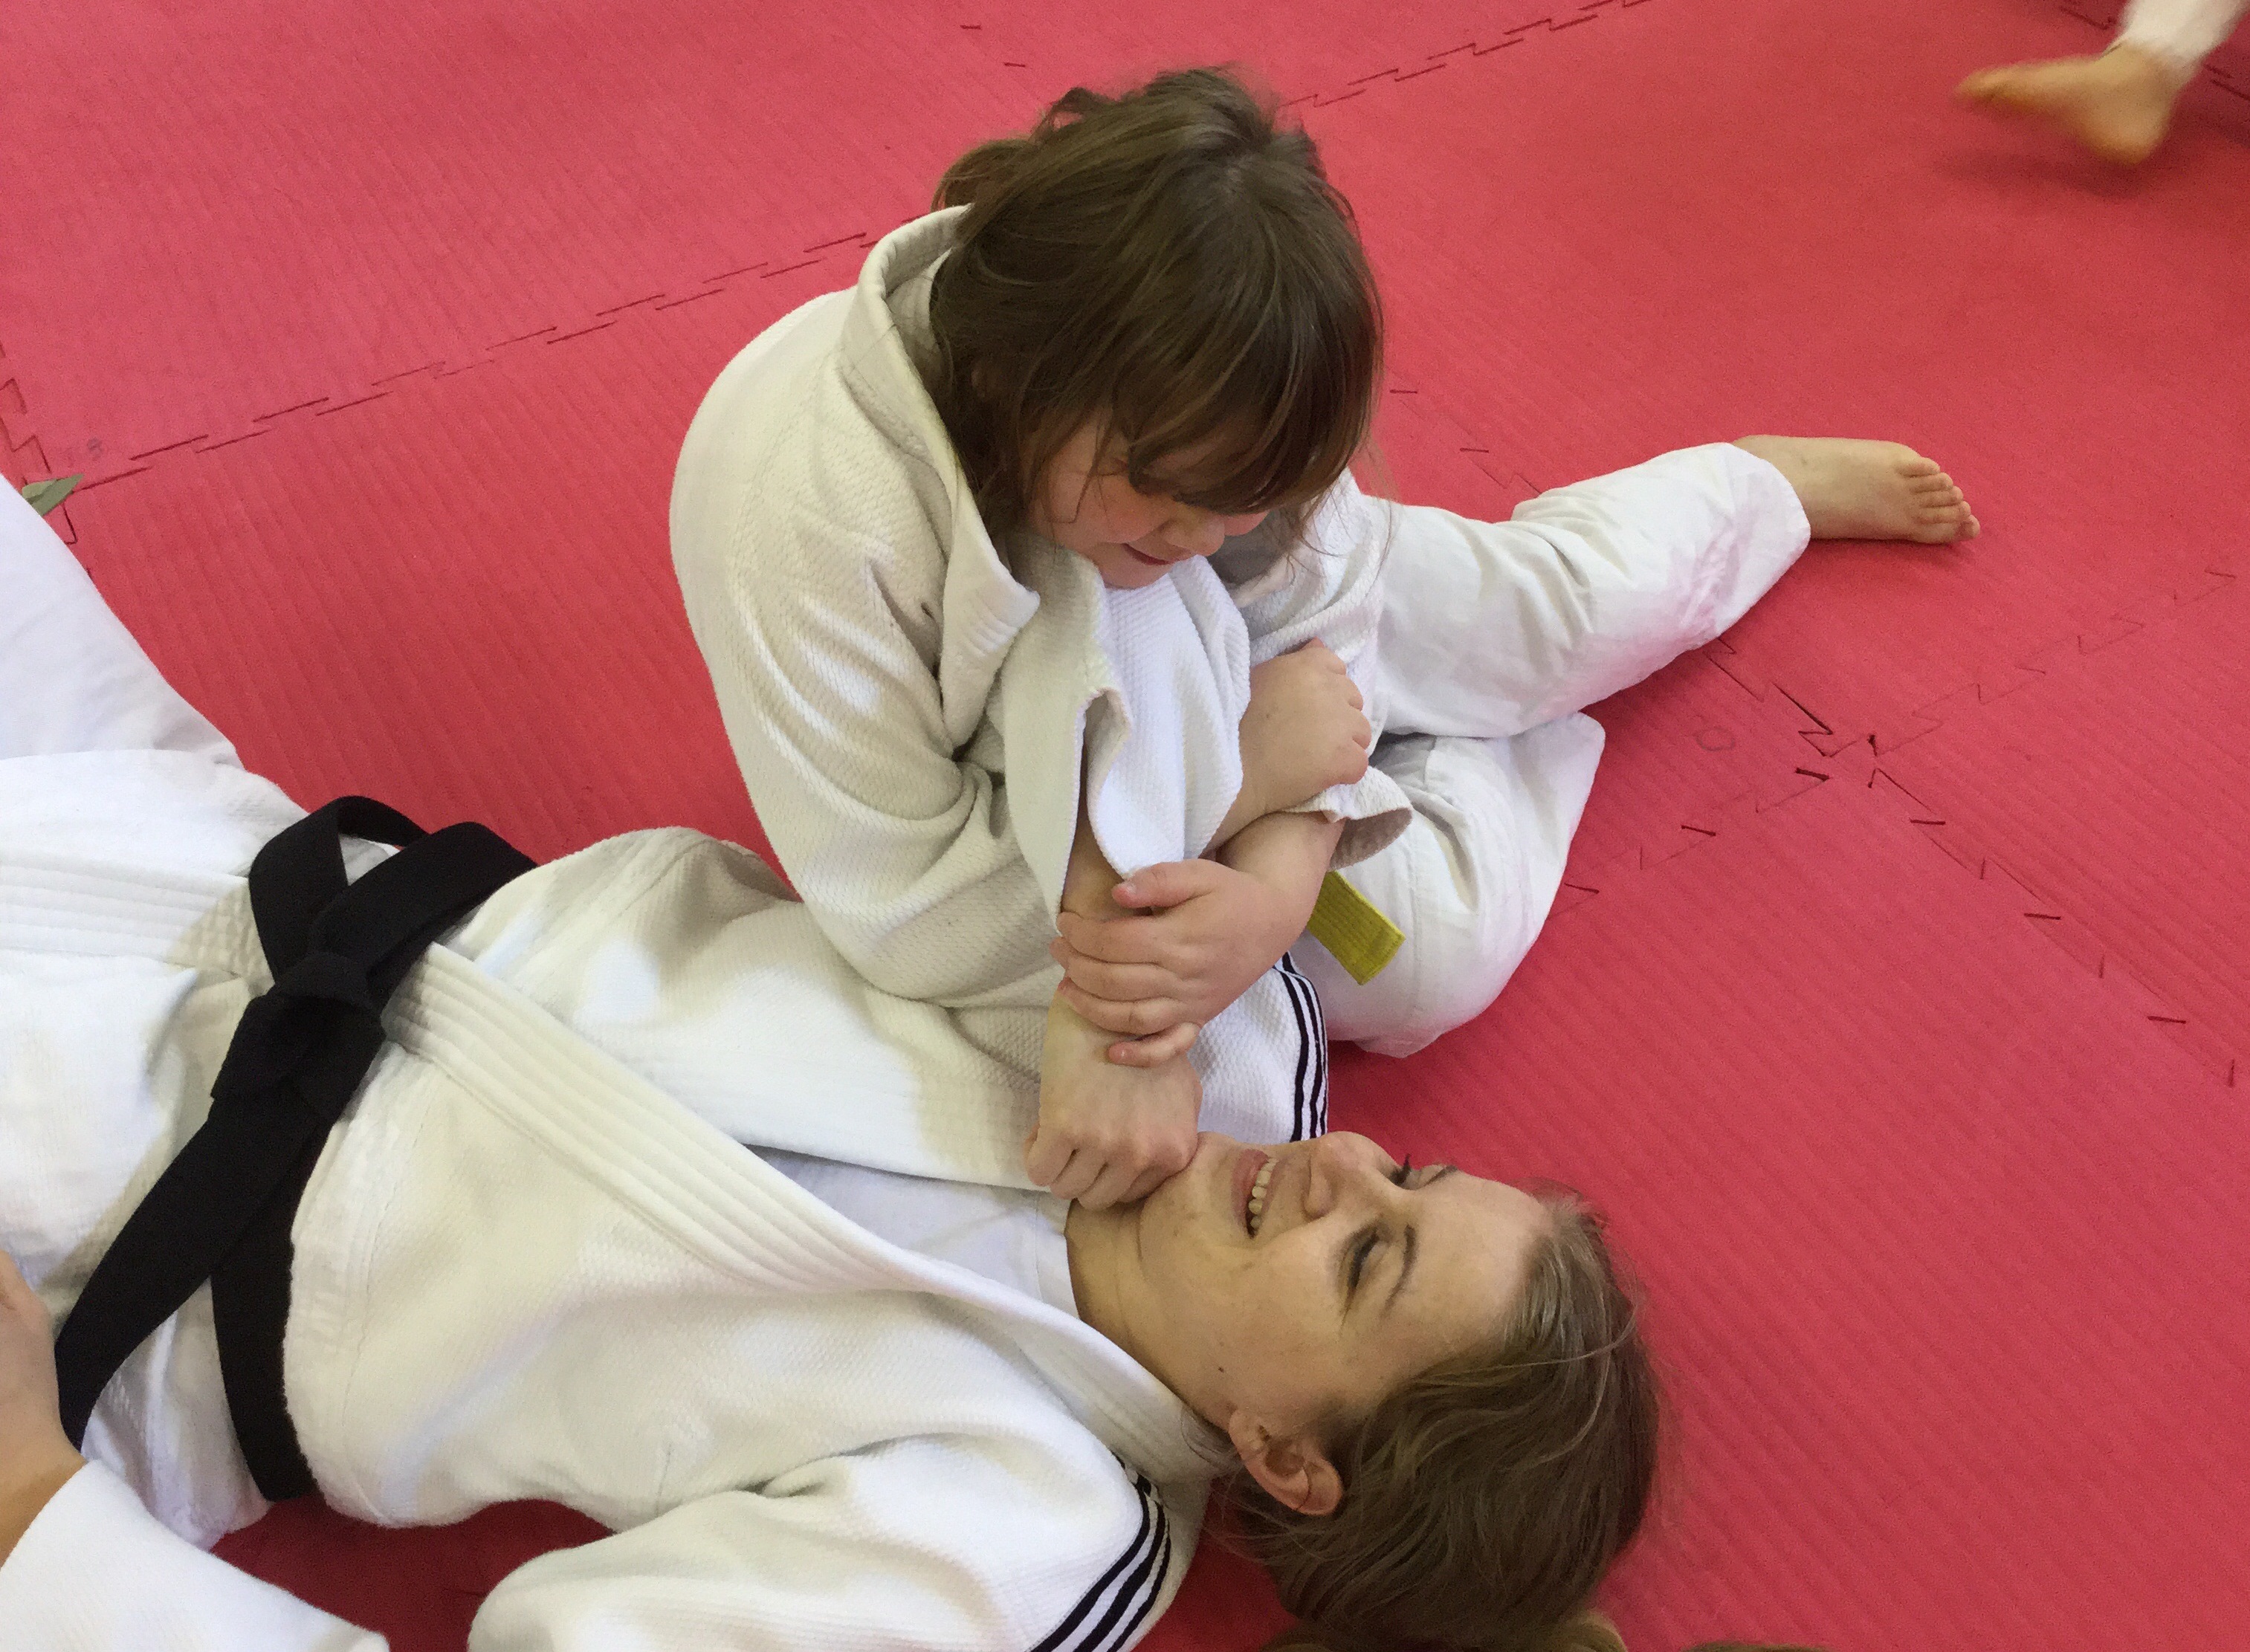 Two females taking part in visually impaired judo